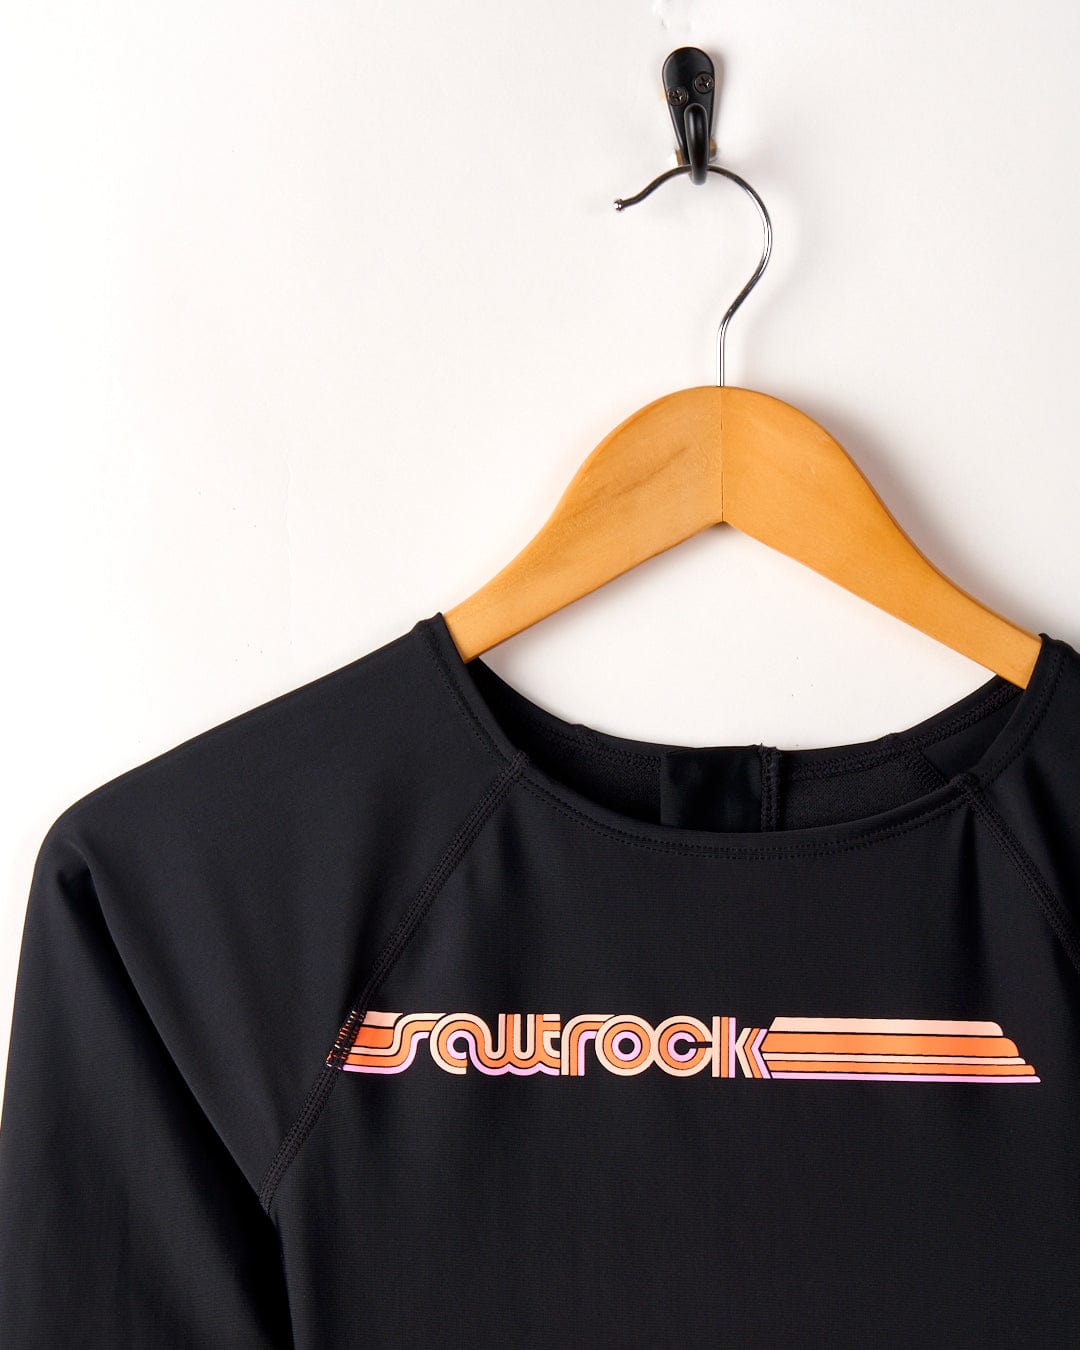 Dark Grey long sleeve swimsuit with "Cora Retro" text in white and orange on a wooden hanger against a white background. (Saltrock)